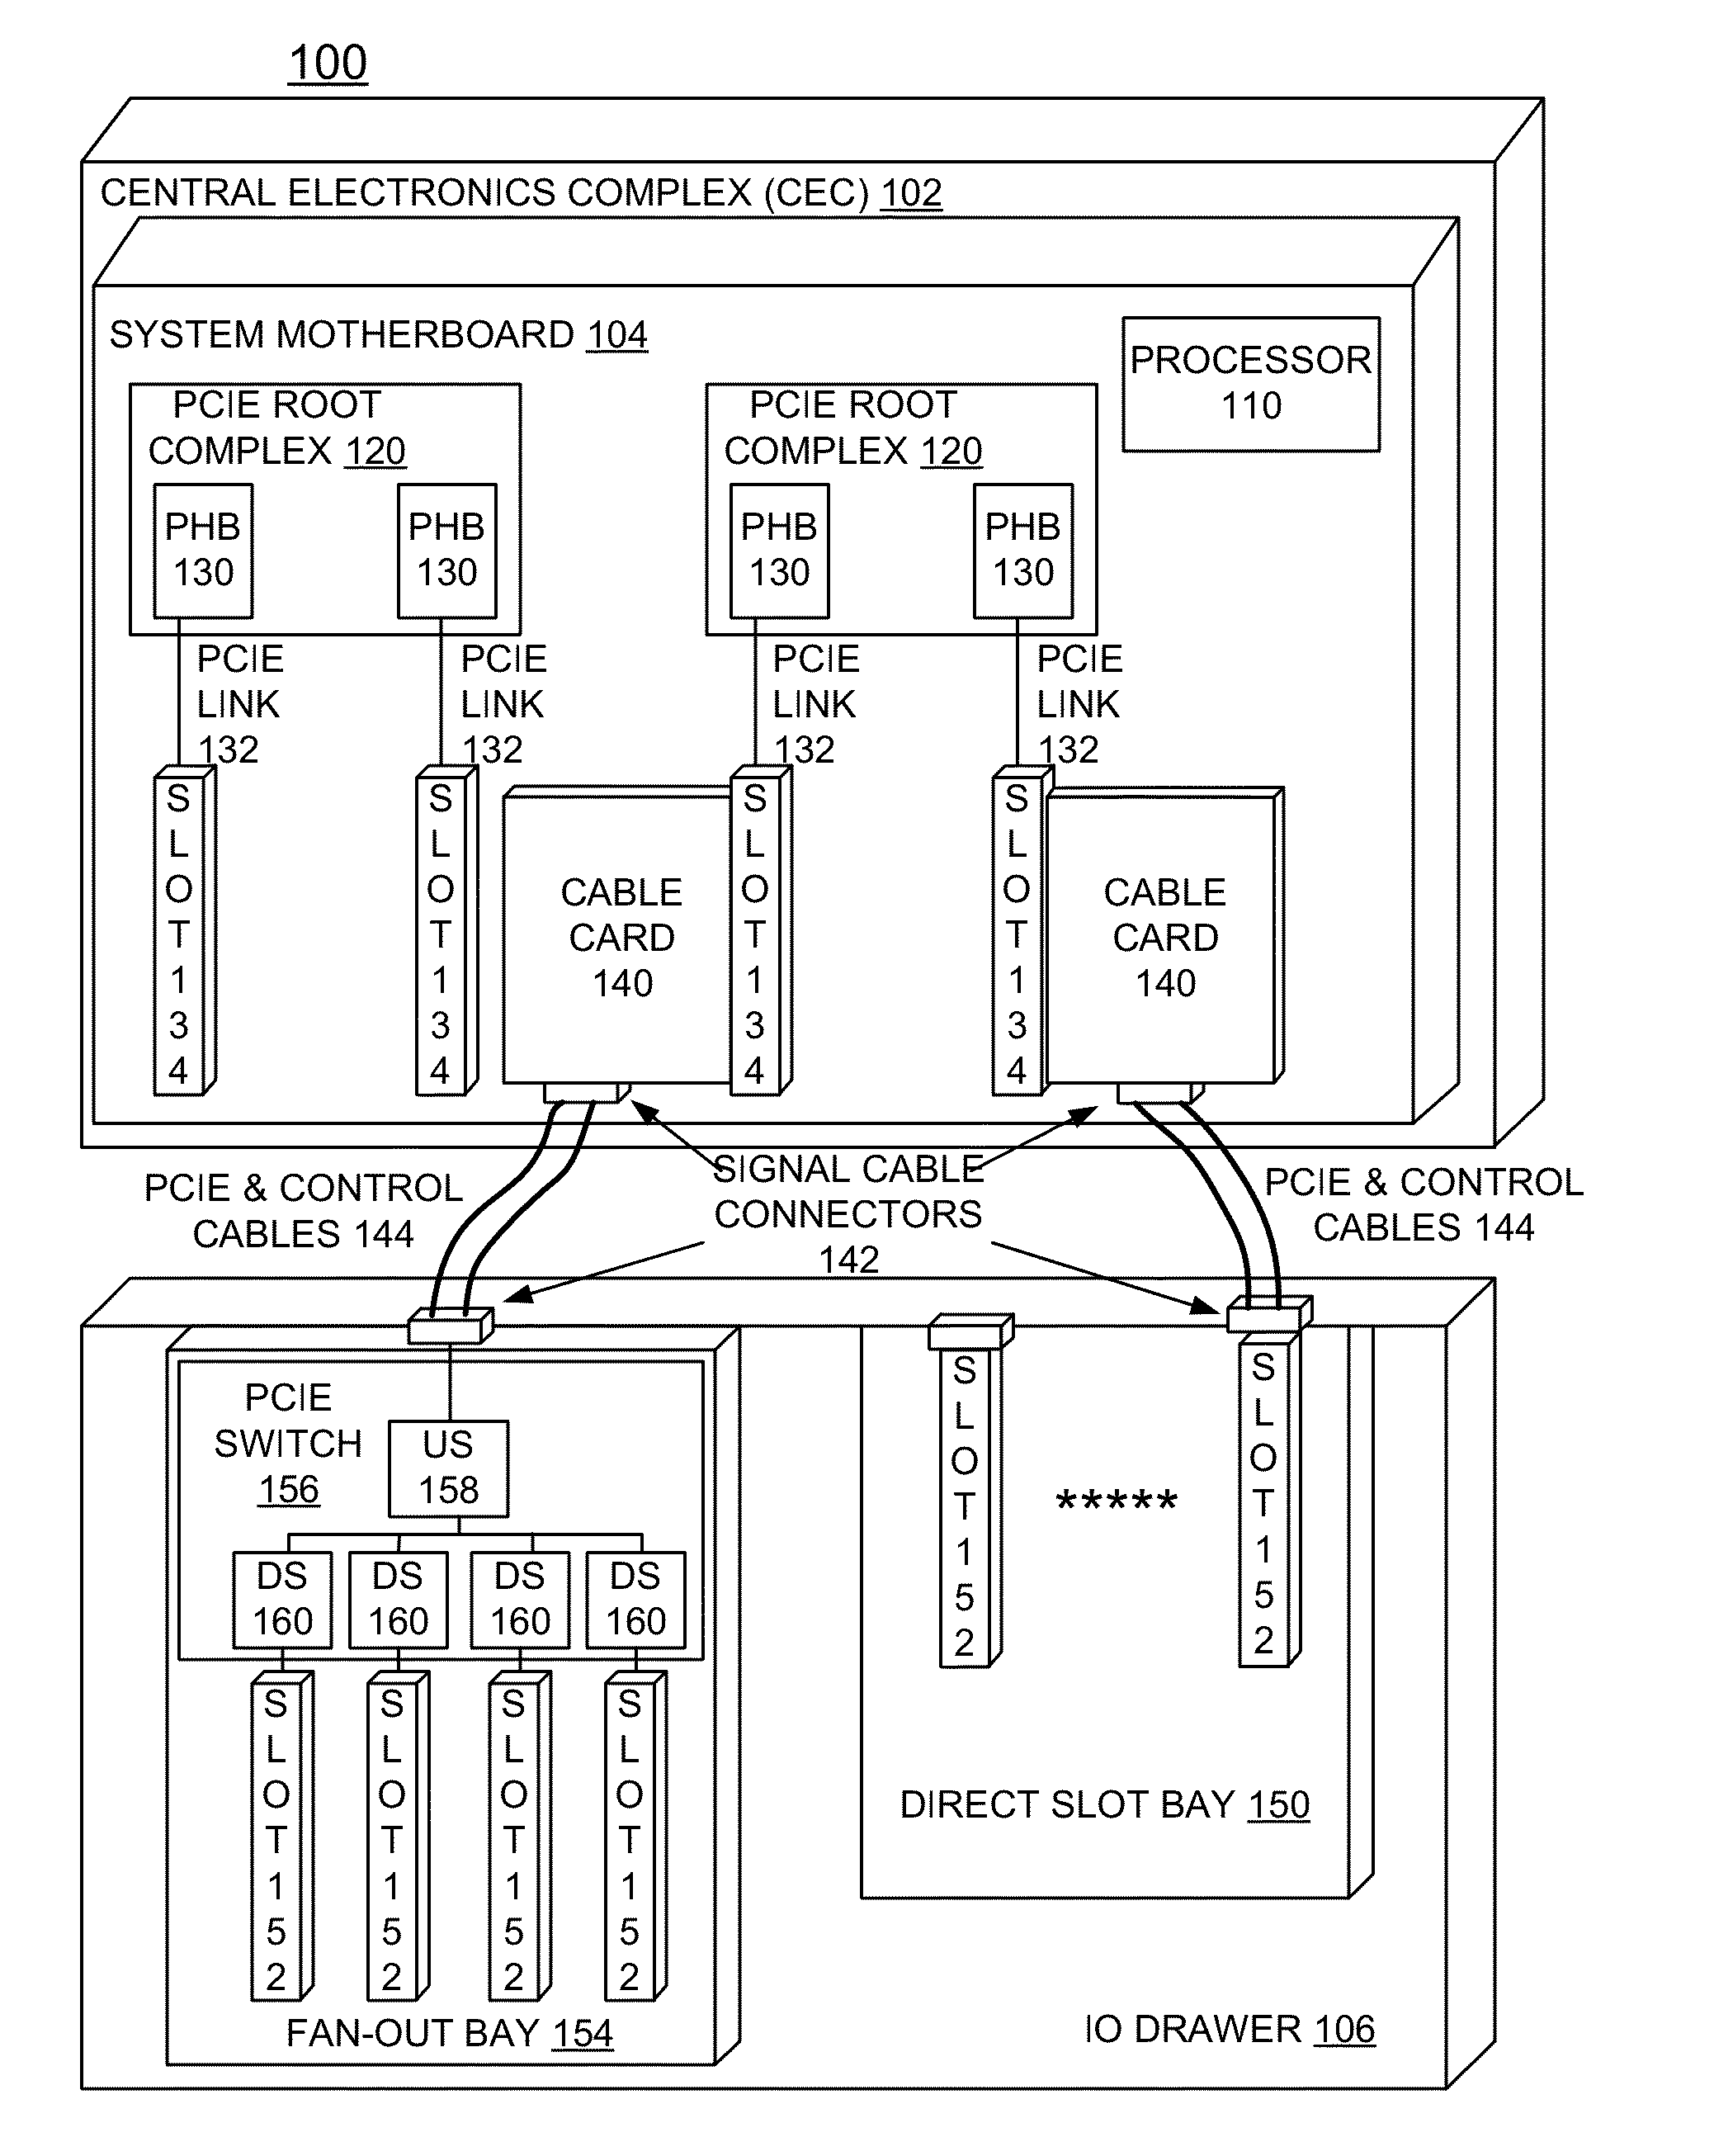 Detecting and sparing of optical pcie cable channel attached io drawer